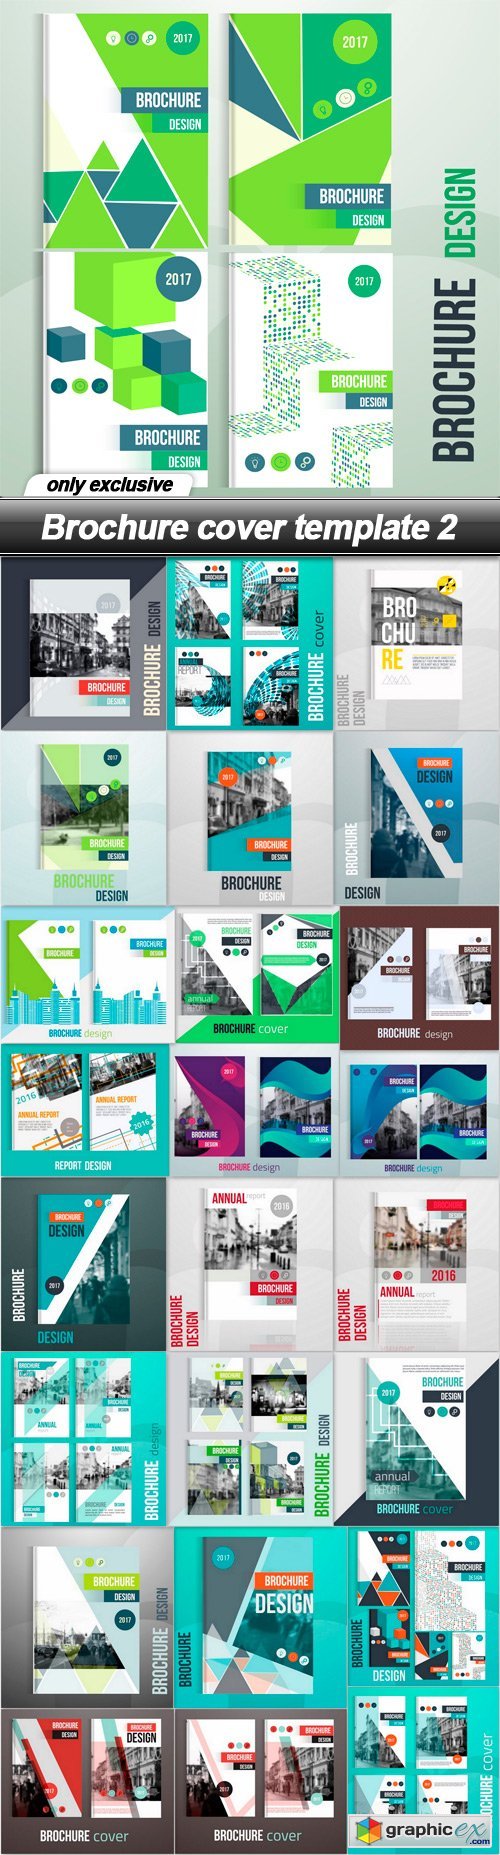 Brochure cover template 2 - 25 EPS